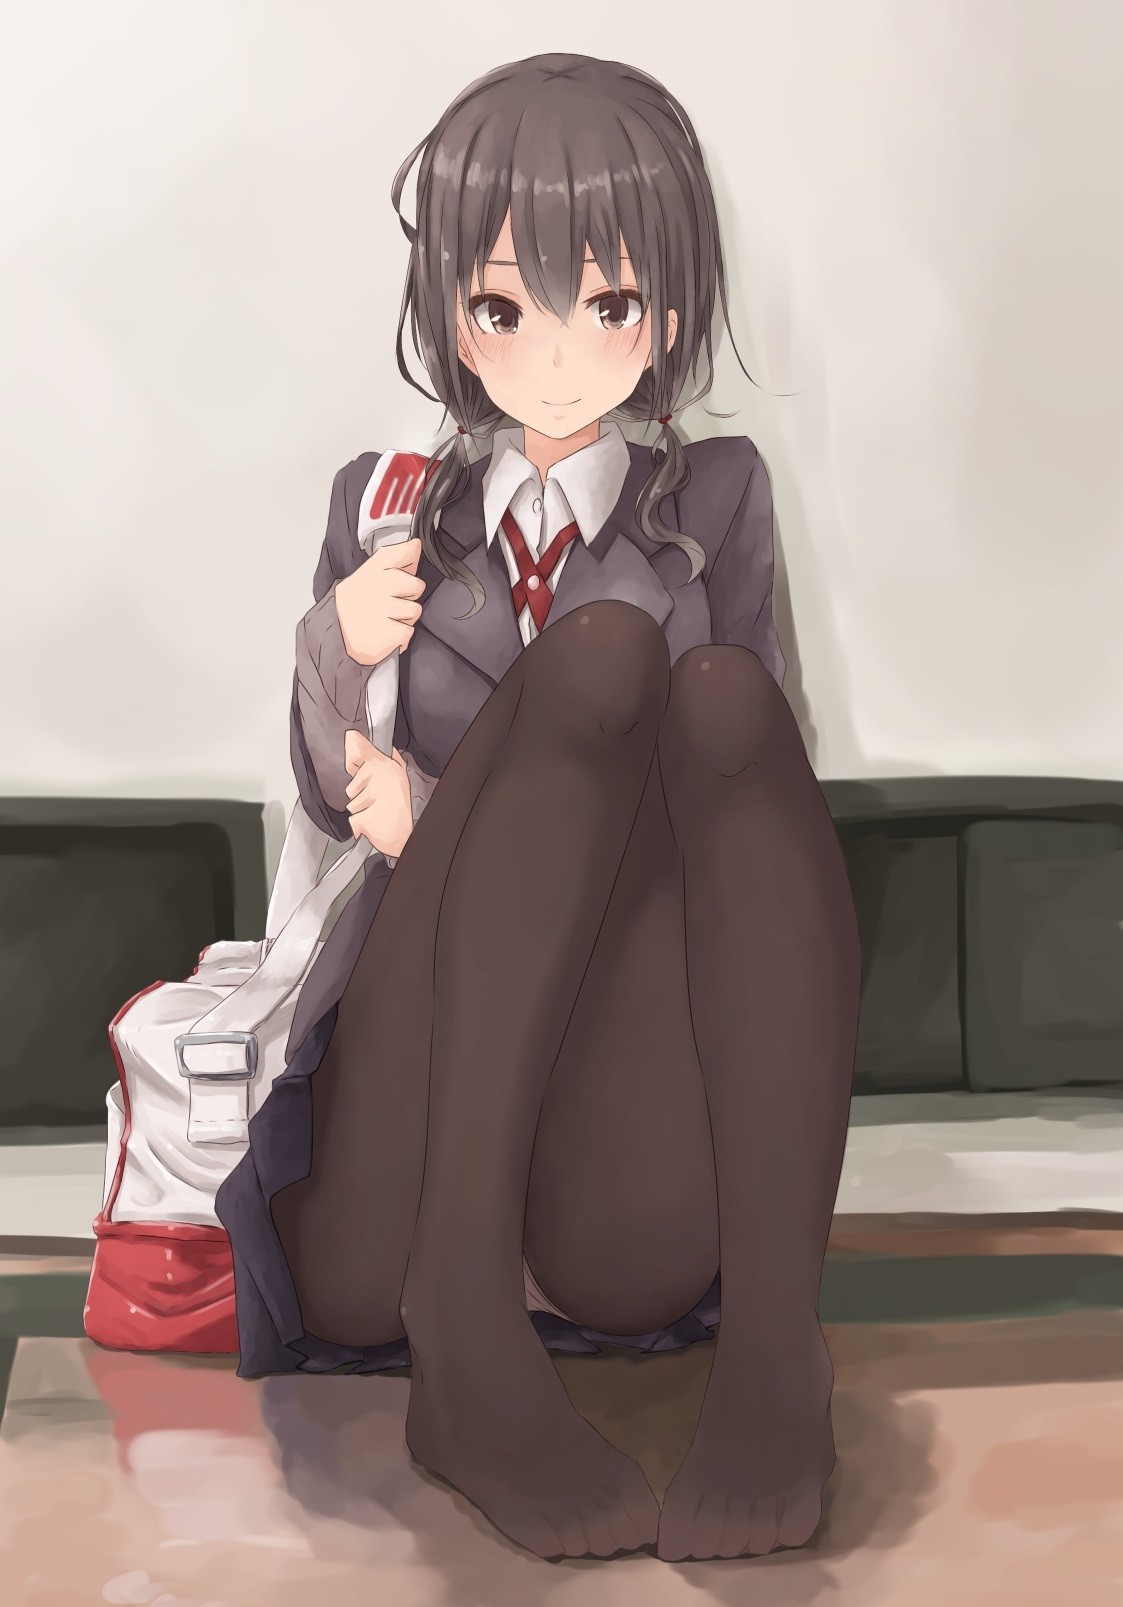 Anime 1123x1607 anime anime girls feet long hair pantyhose thighs together Pixiv women indoors indoors smiling brunette sitting on the floor looking at viewer